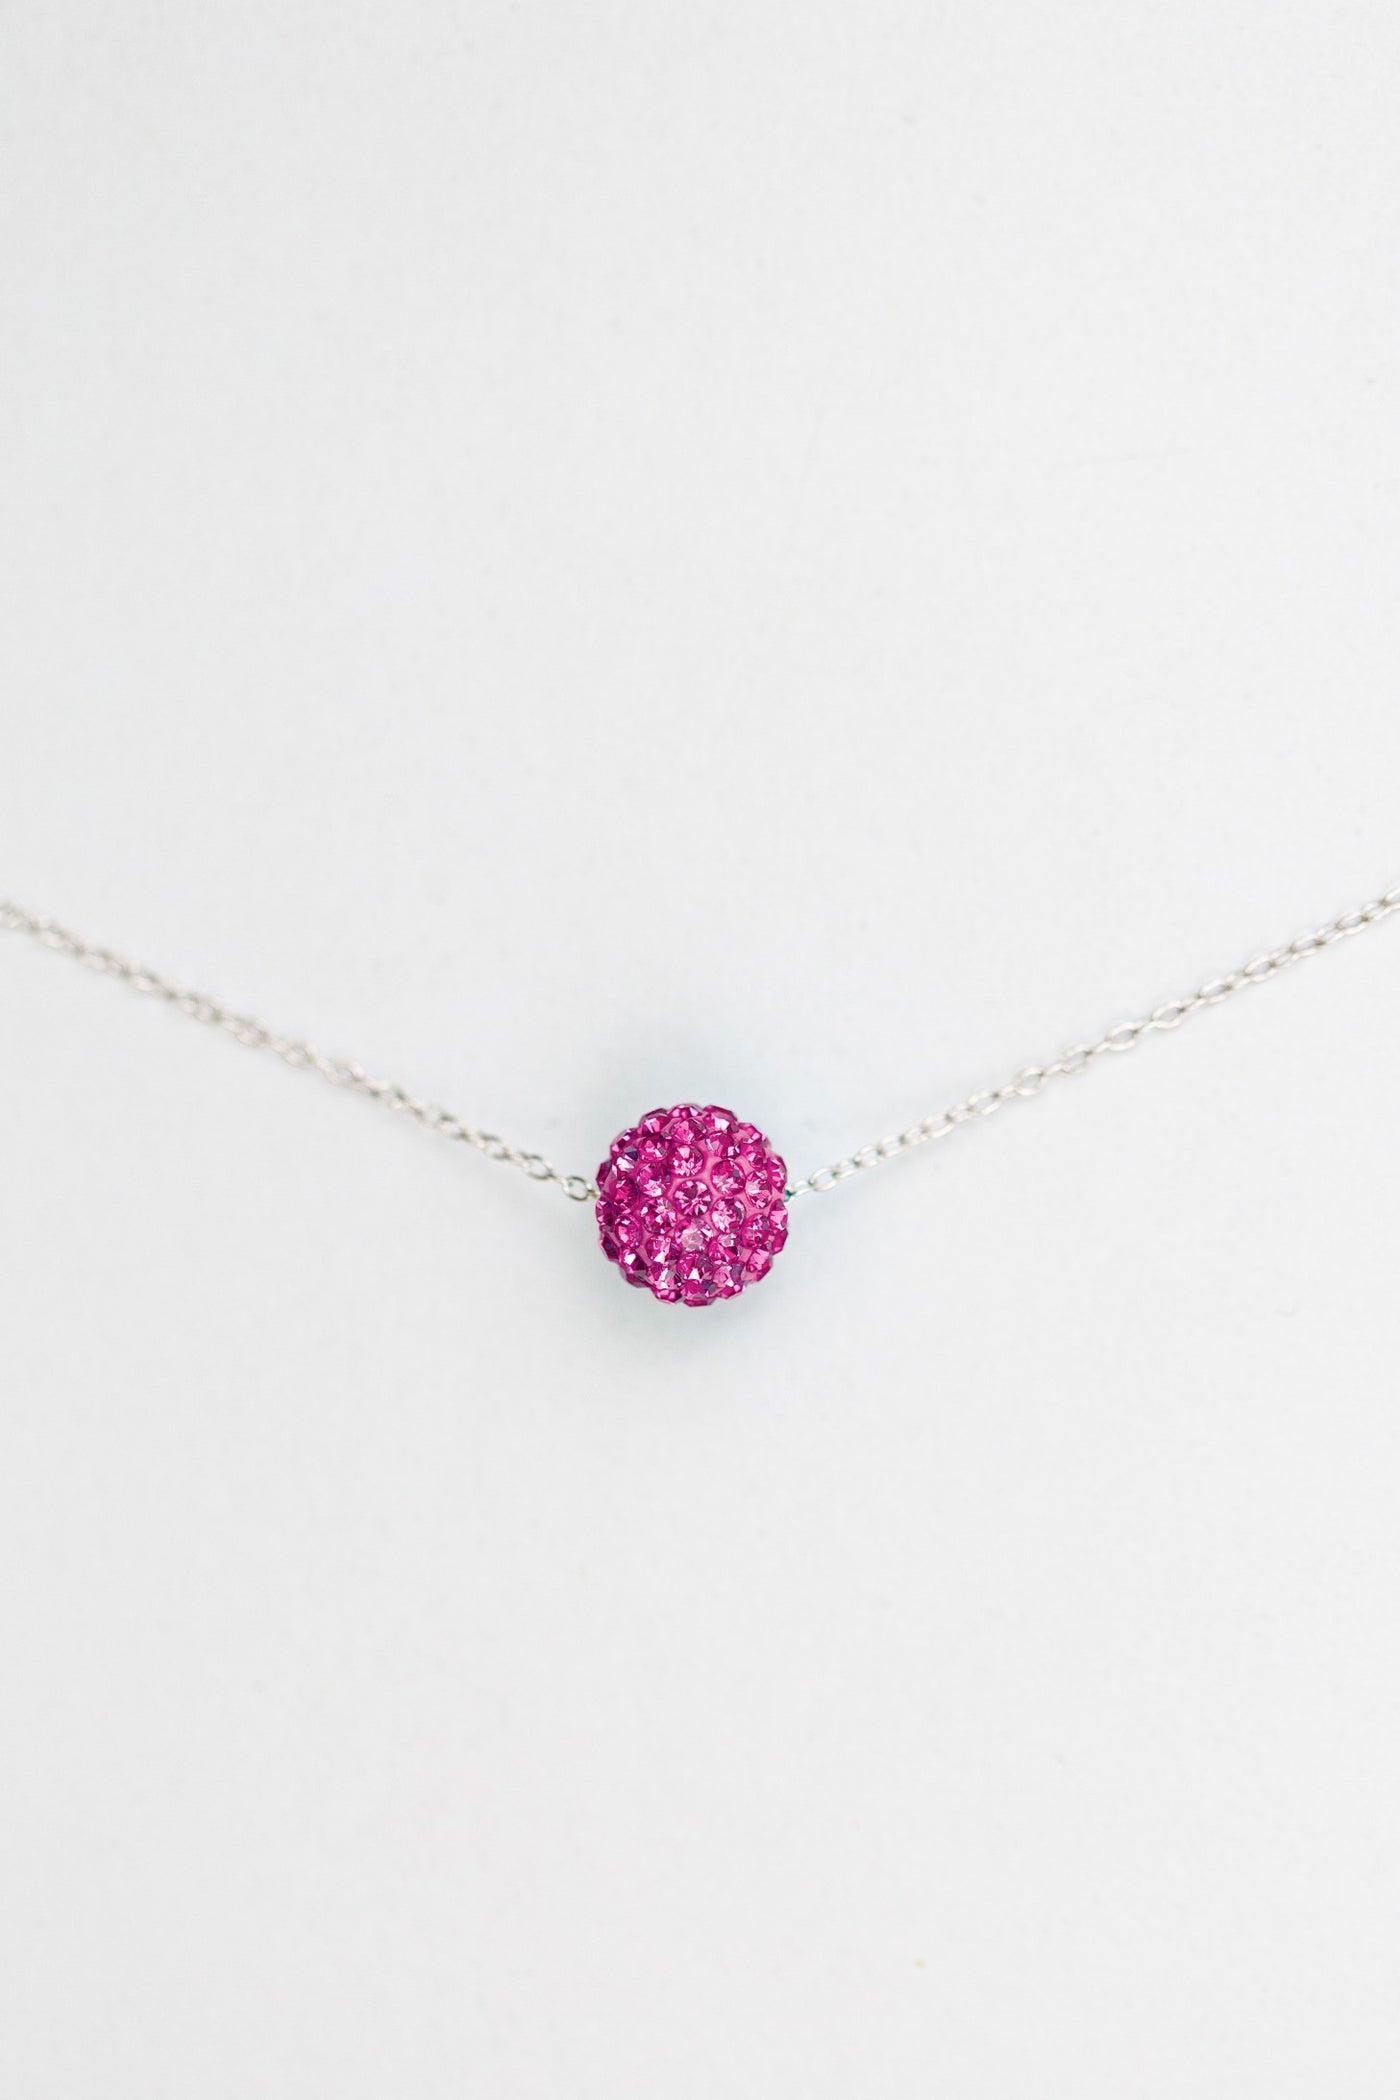 10mm Disco Ball Crystal Sterling Silver Necklace in Fuchsia Crystal | Annie and Sisters